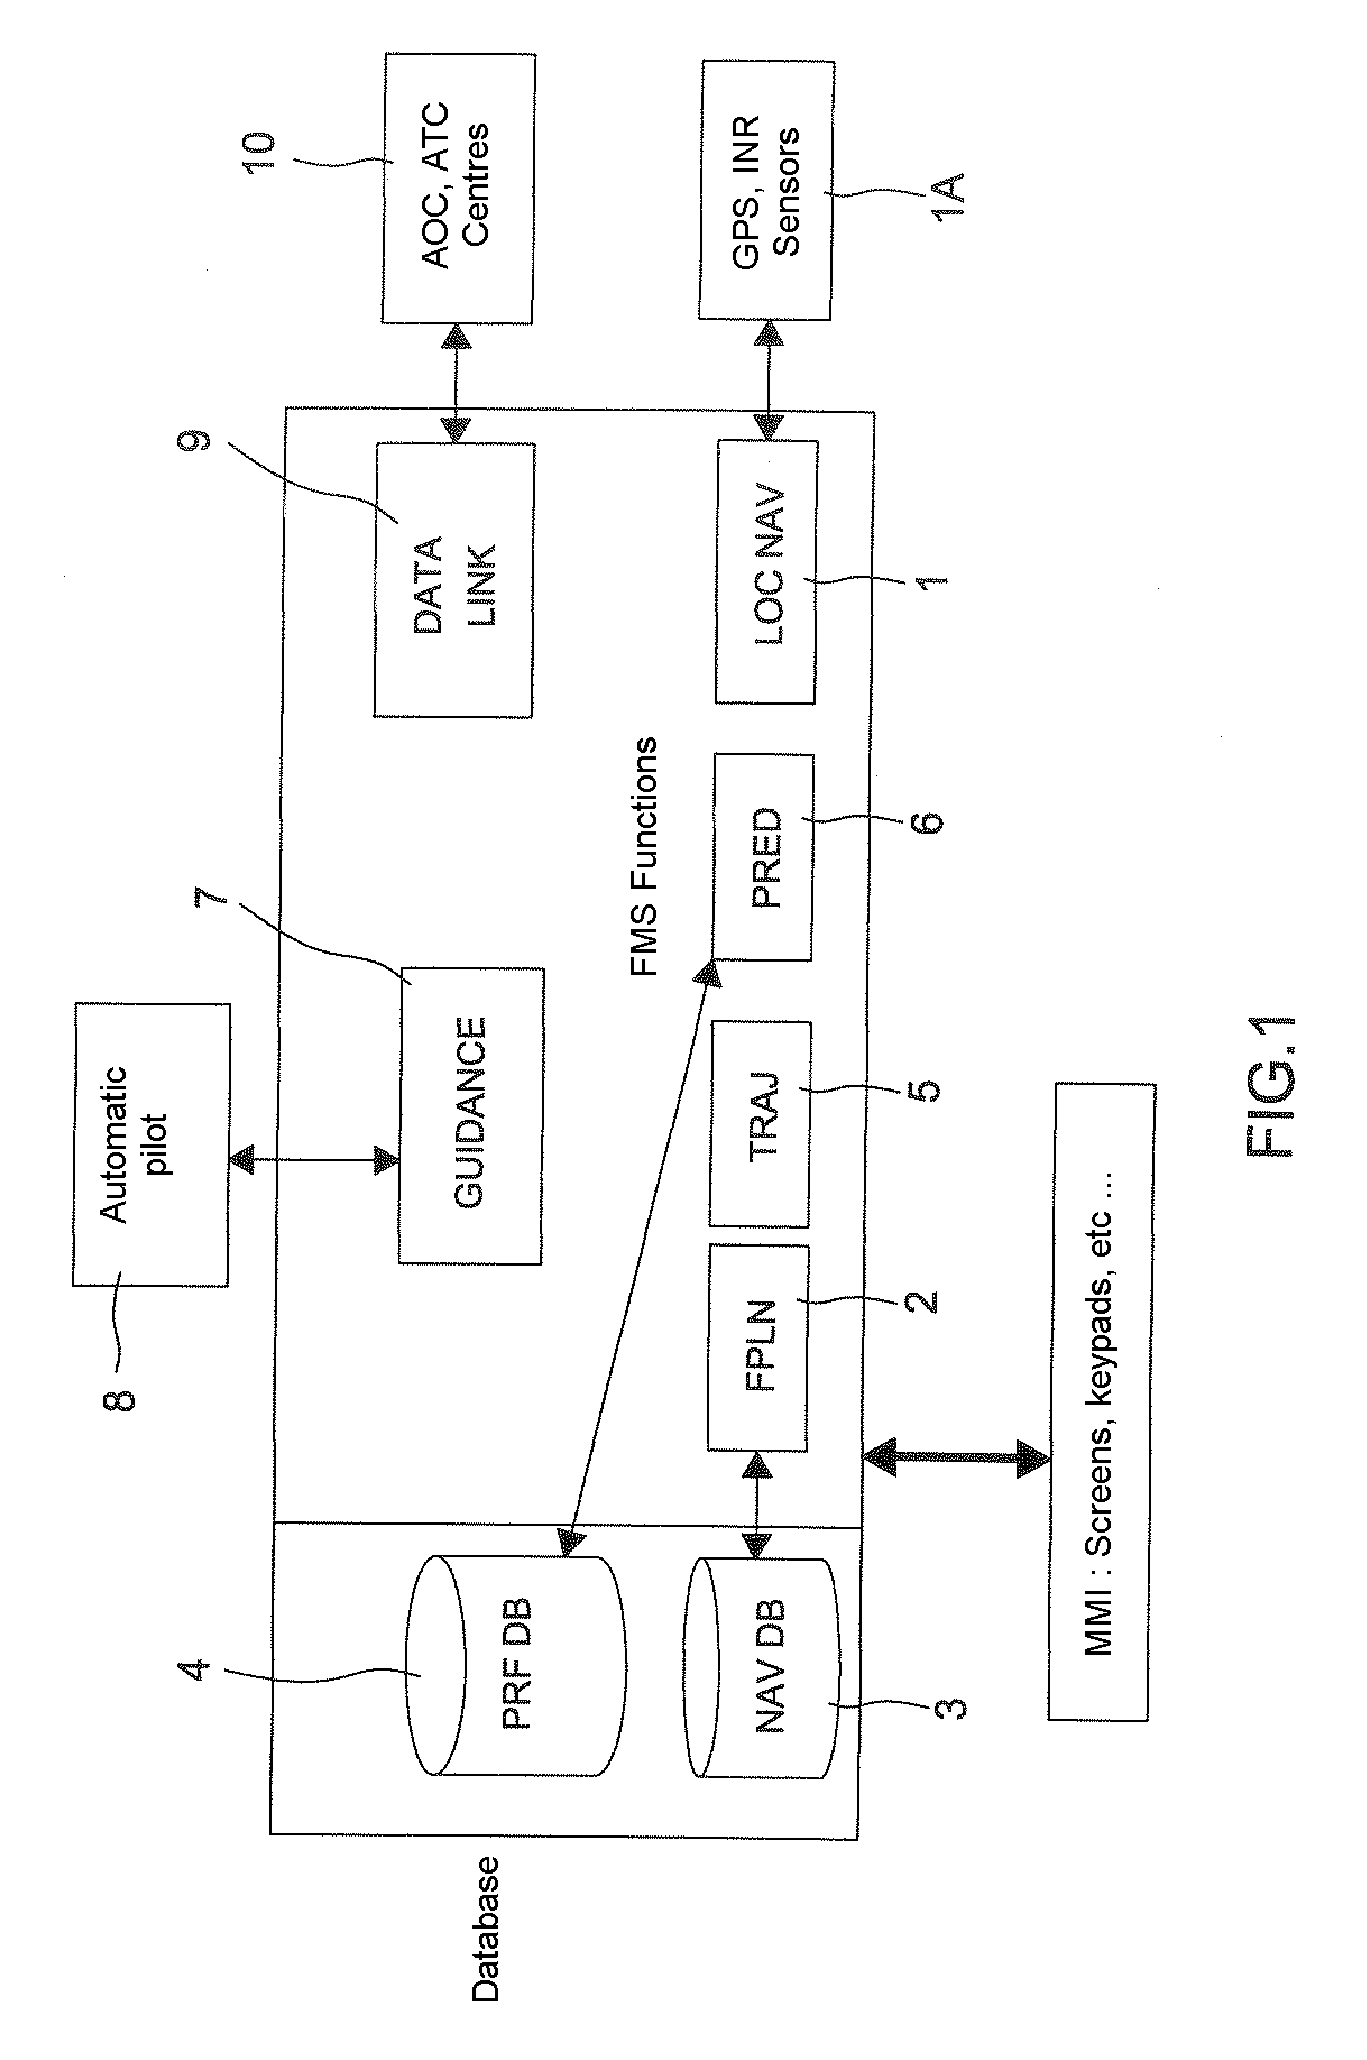 Method of forming a 3D safe emergency descent trajectory for aircraft and implementation device